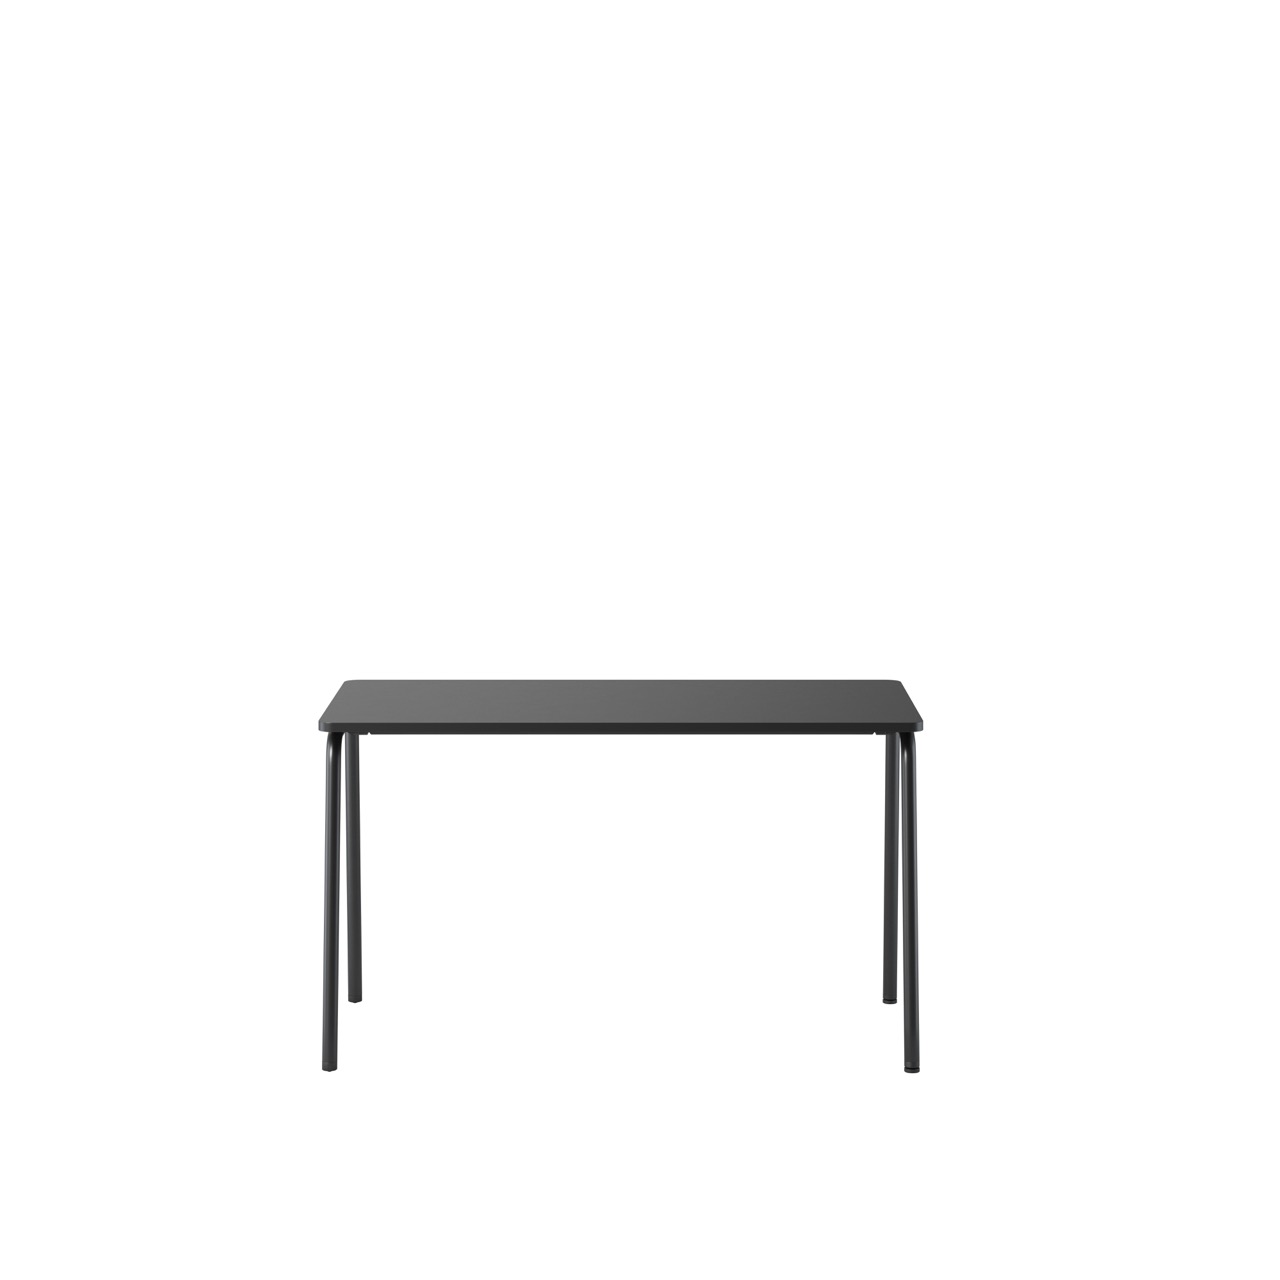 OCEE&FOUR - Tables - FourReal 74 - 128 x 64 - Angled - Packshot Image 3 Large